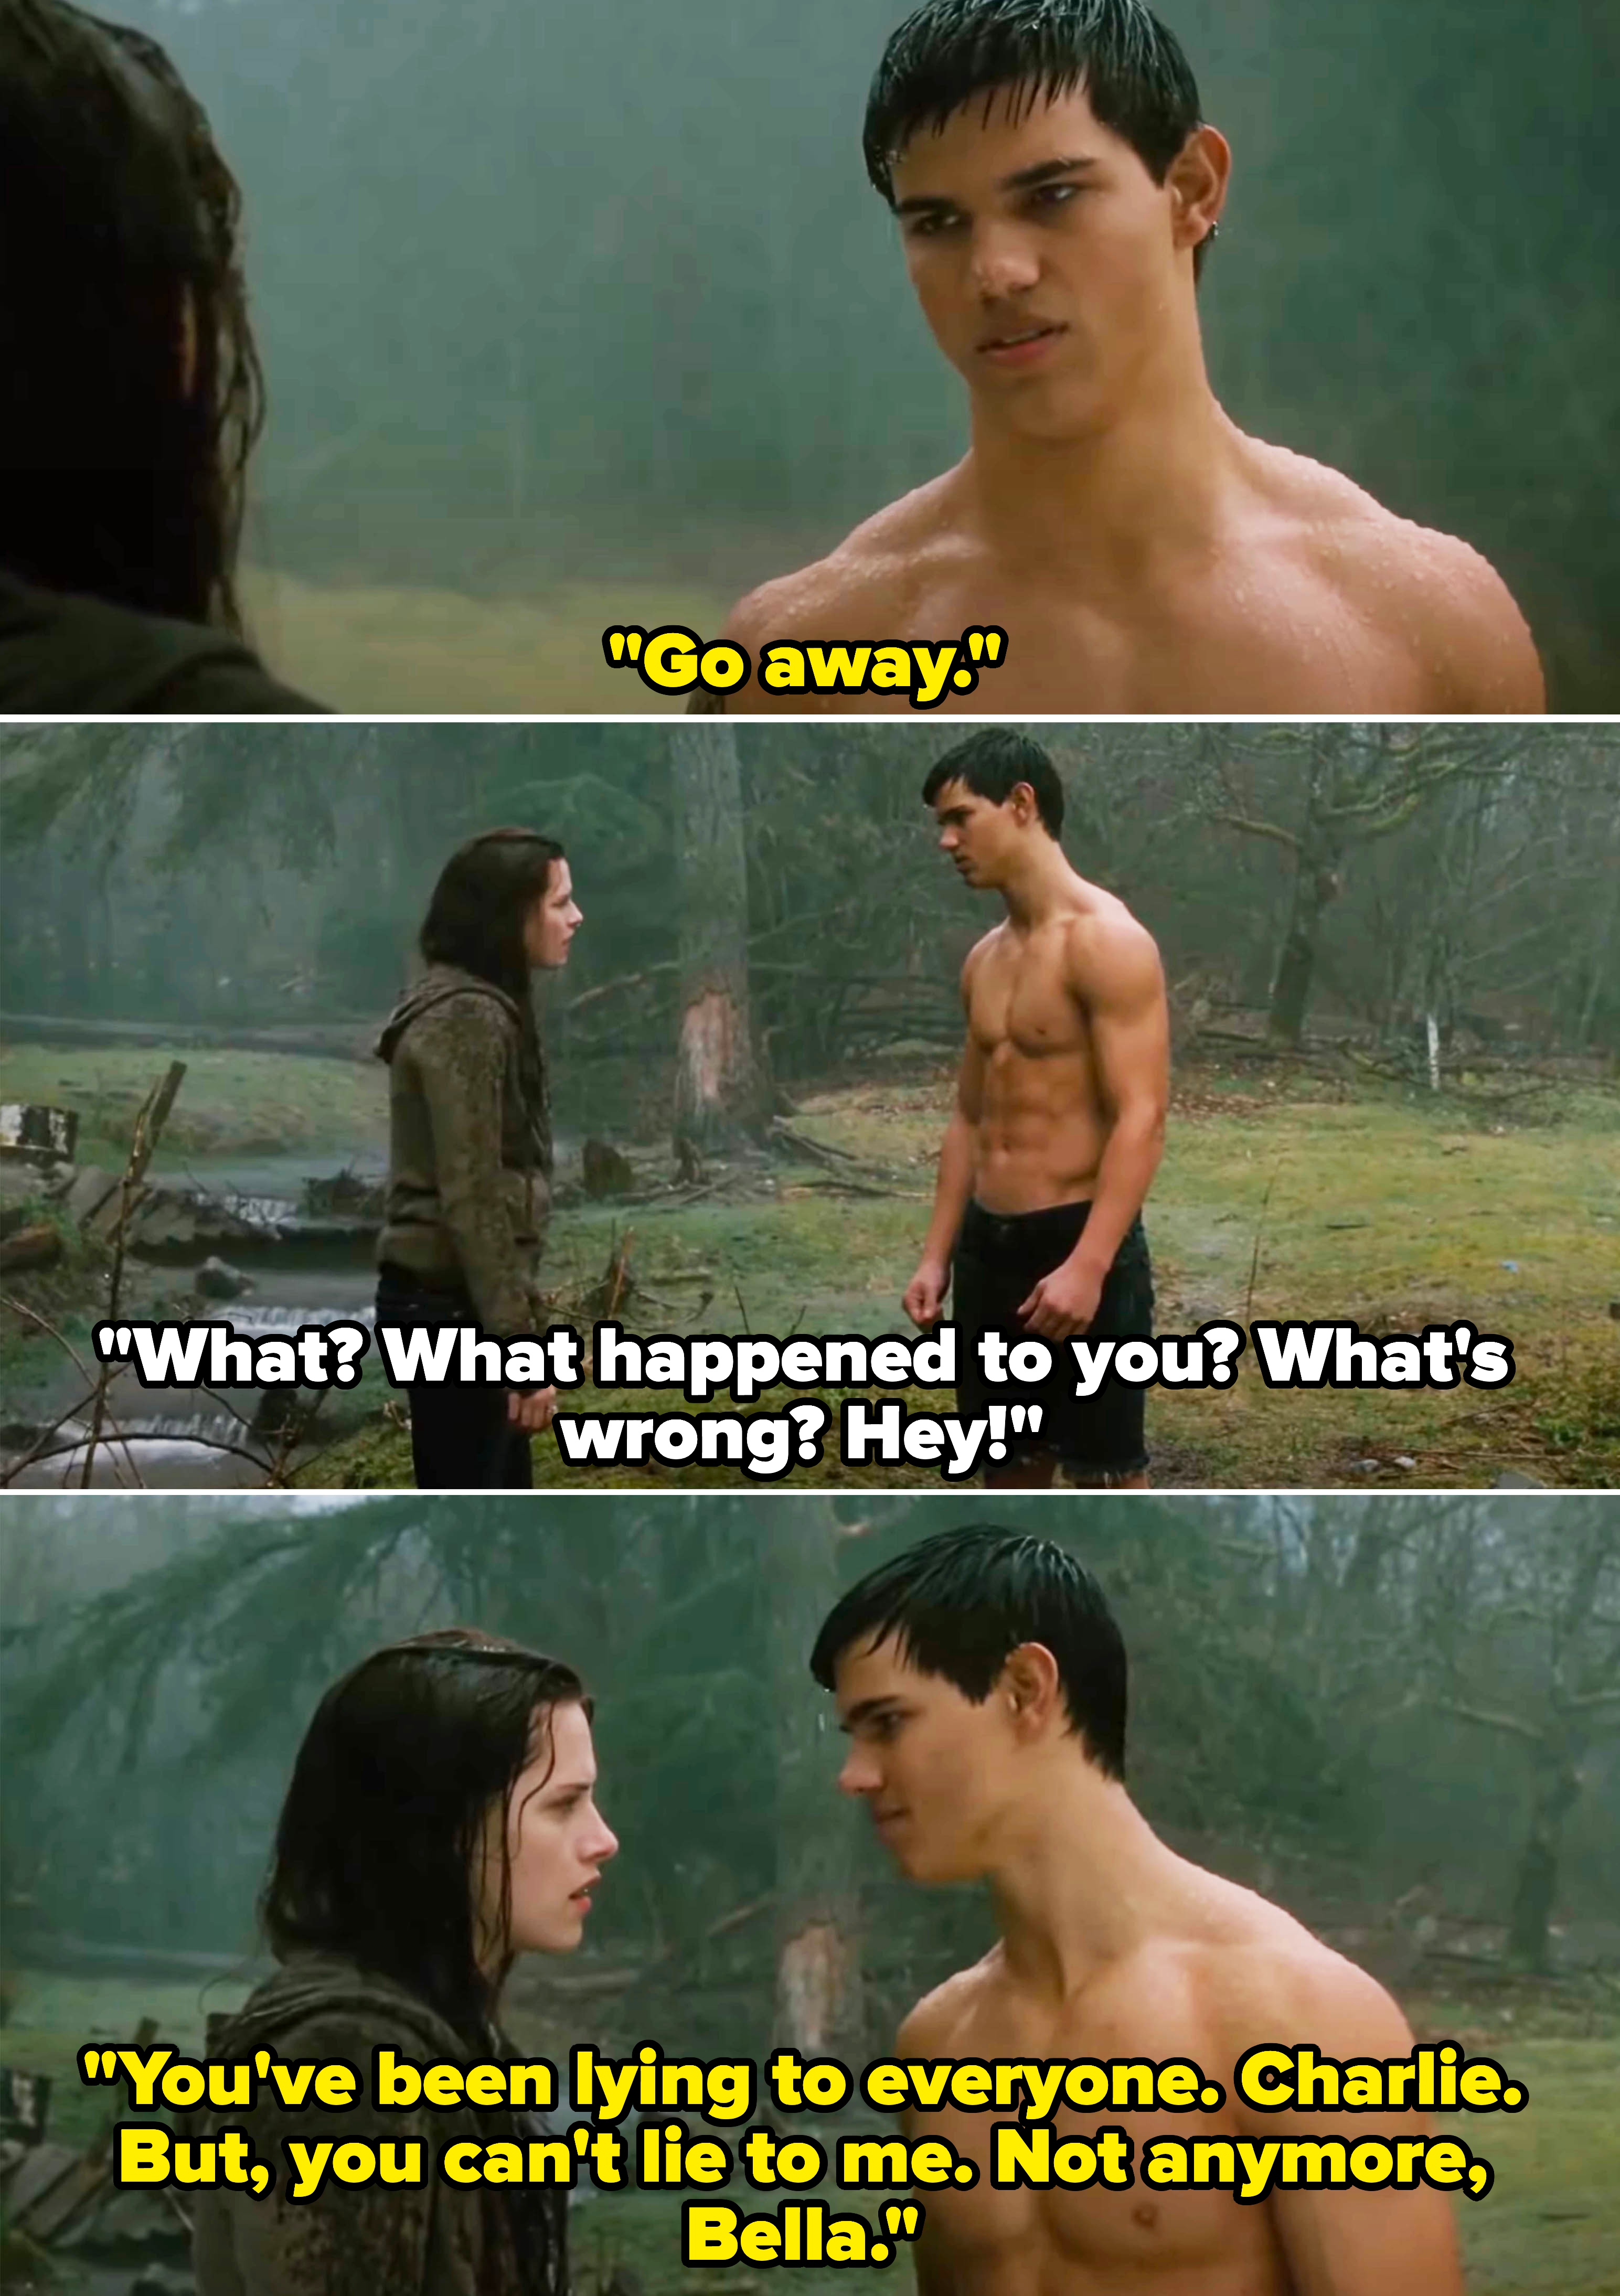 his character talking to bella without a shirt on